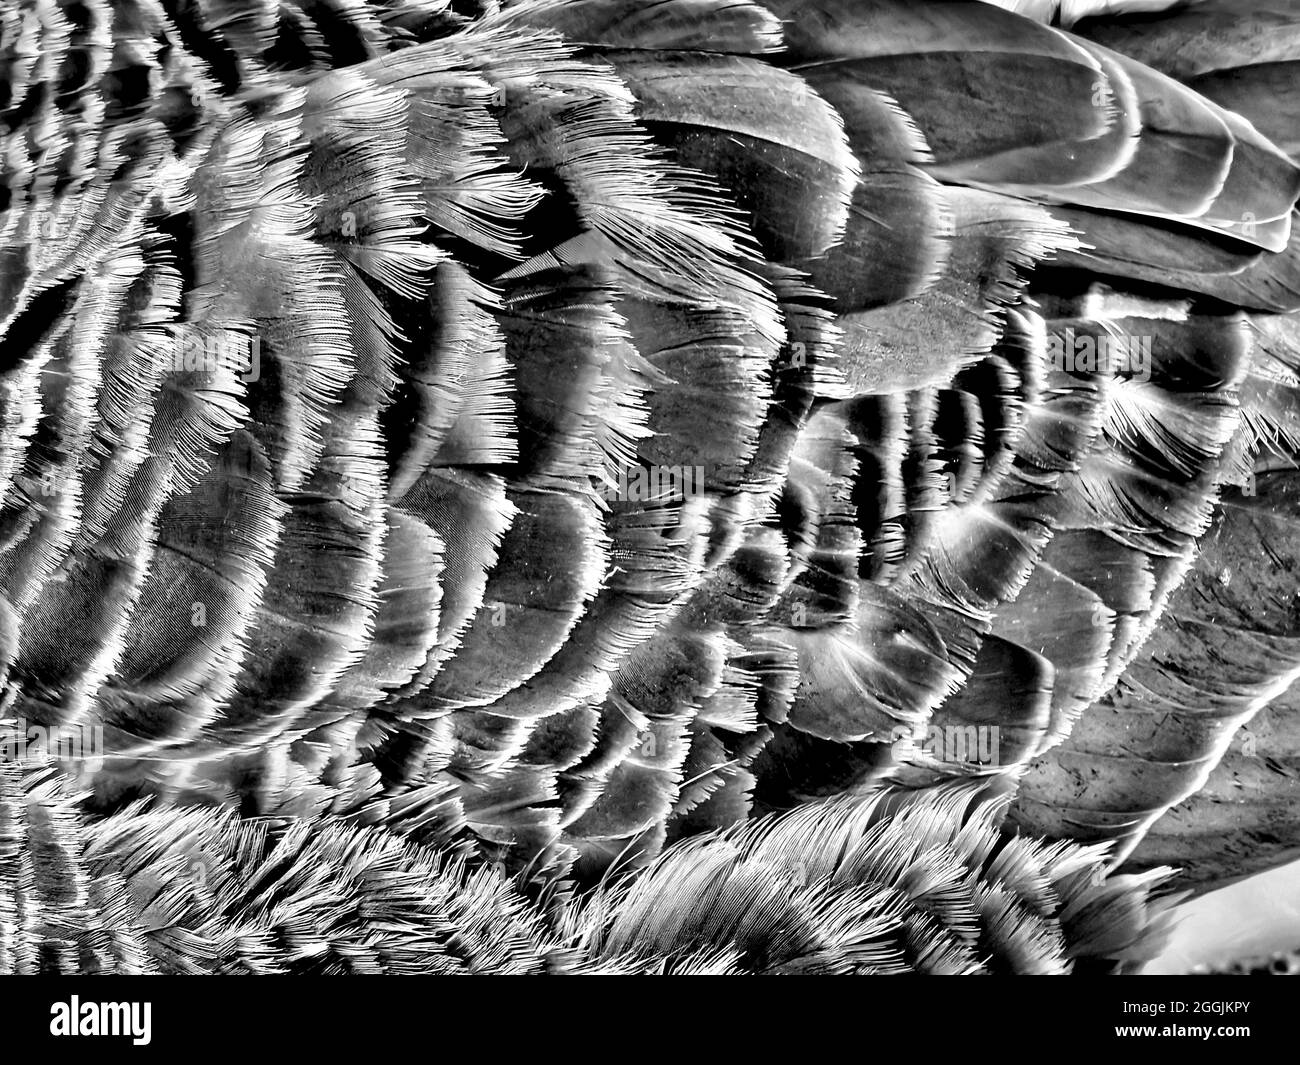 Feathers Black and White Stock Photos & Images - Alamy